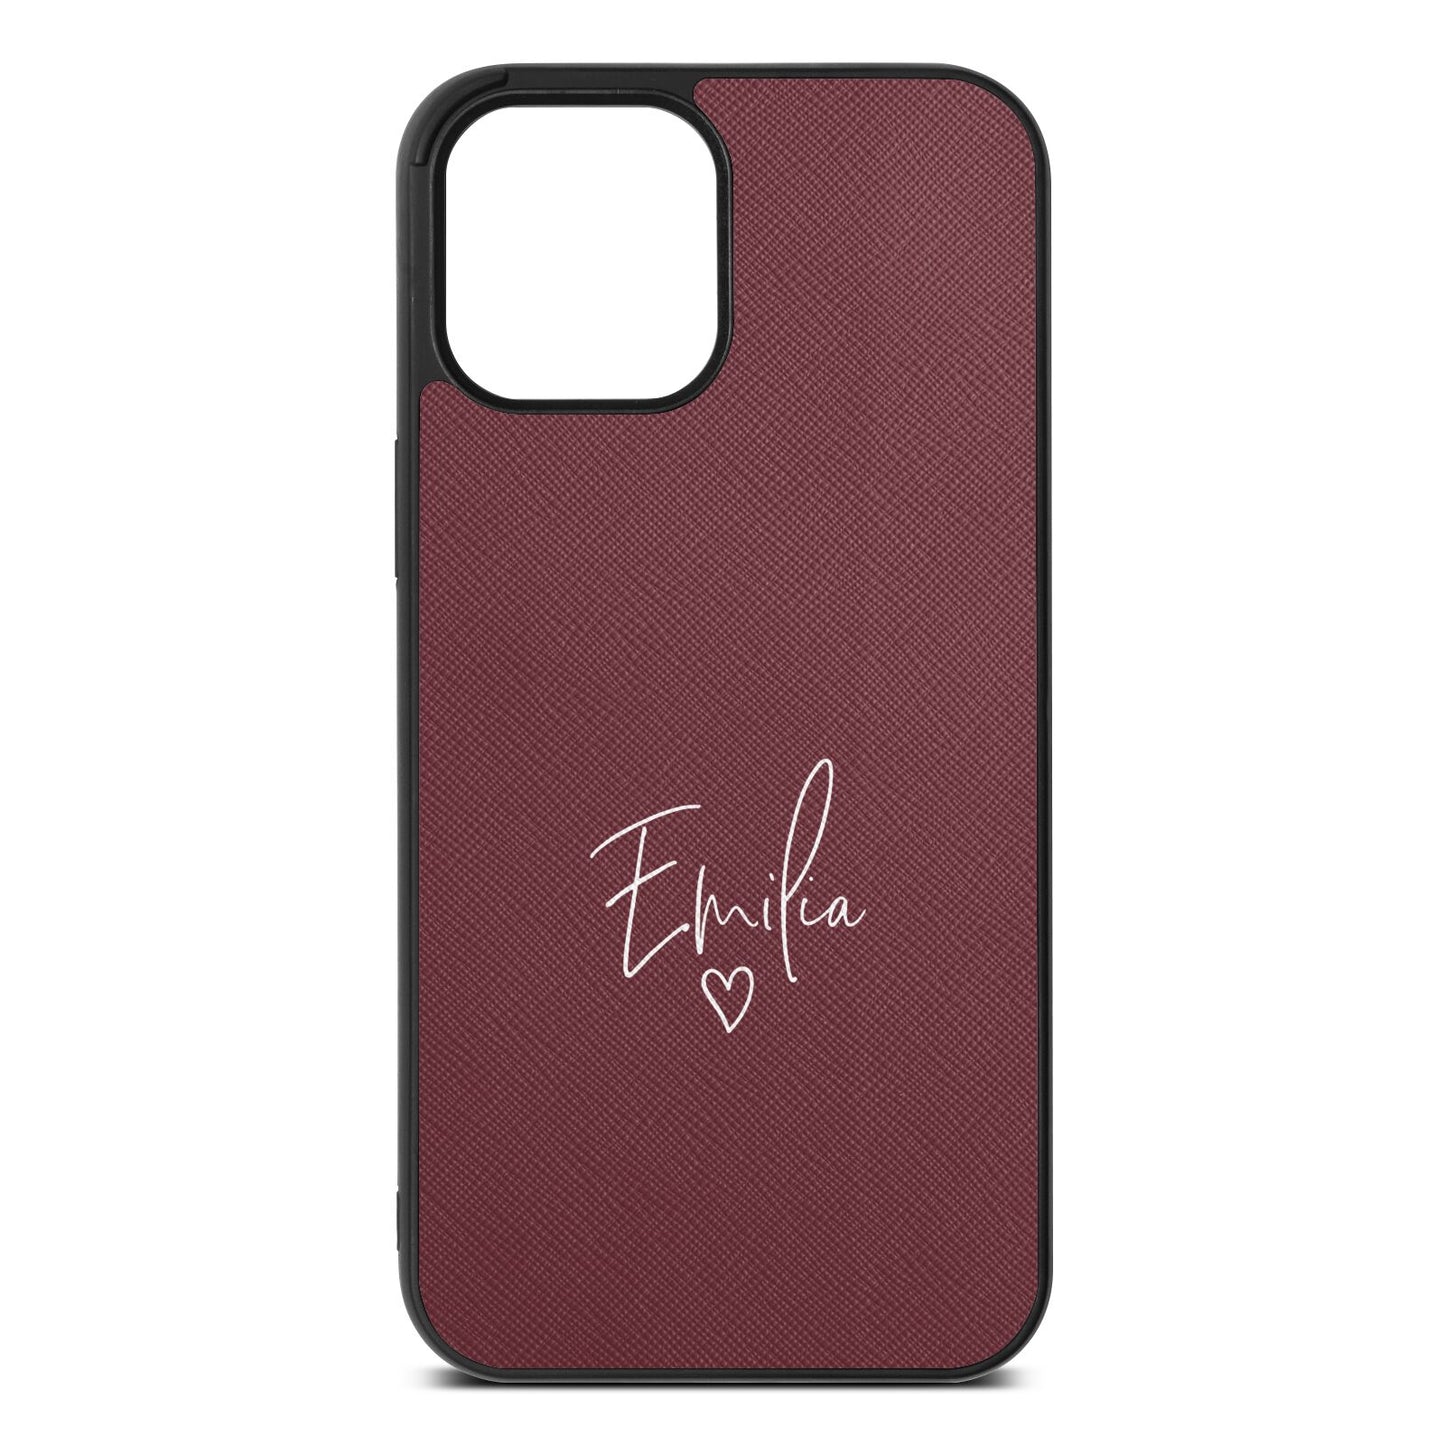 White Handwritten Name Transparent Rose Brown Saffiano Leather iPhone 12 Pro Max Case